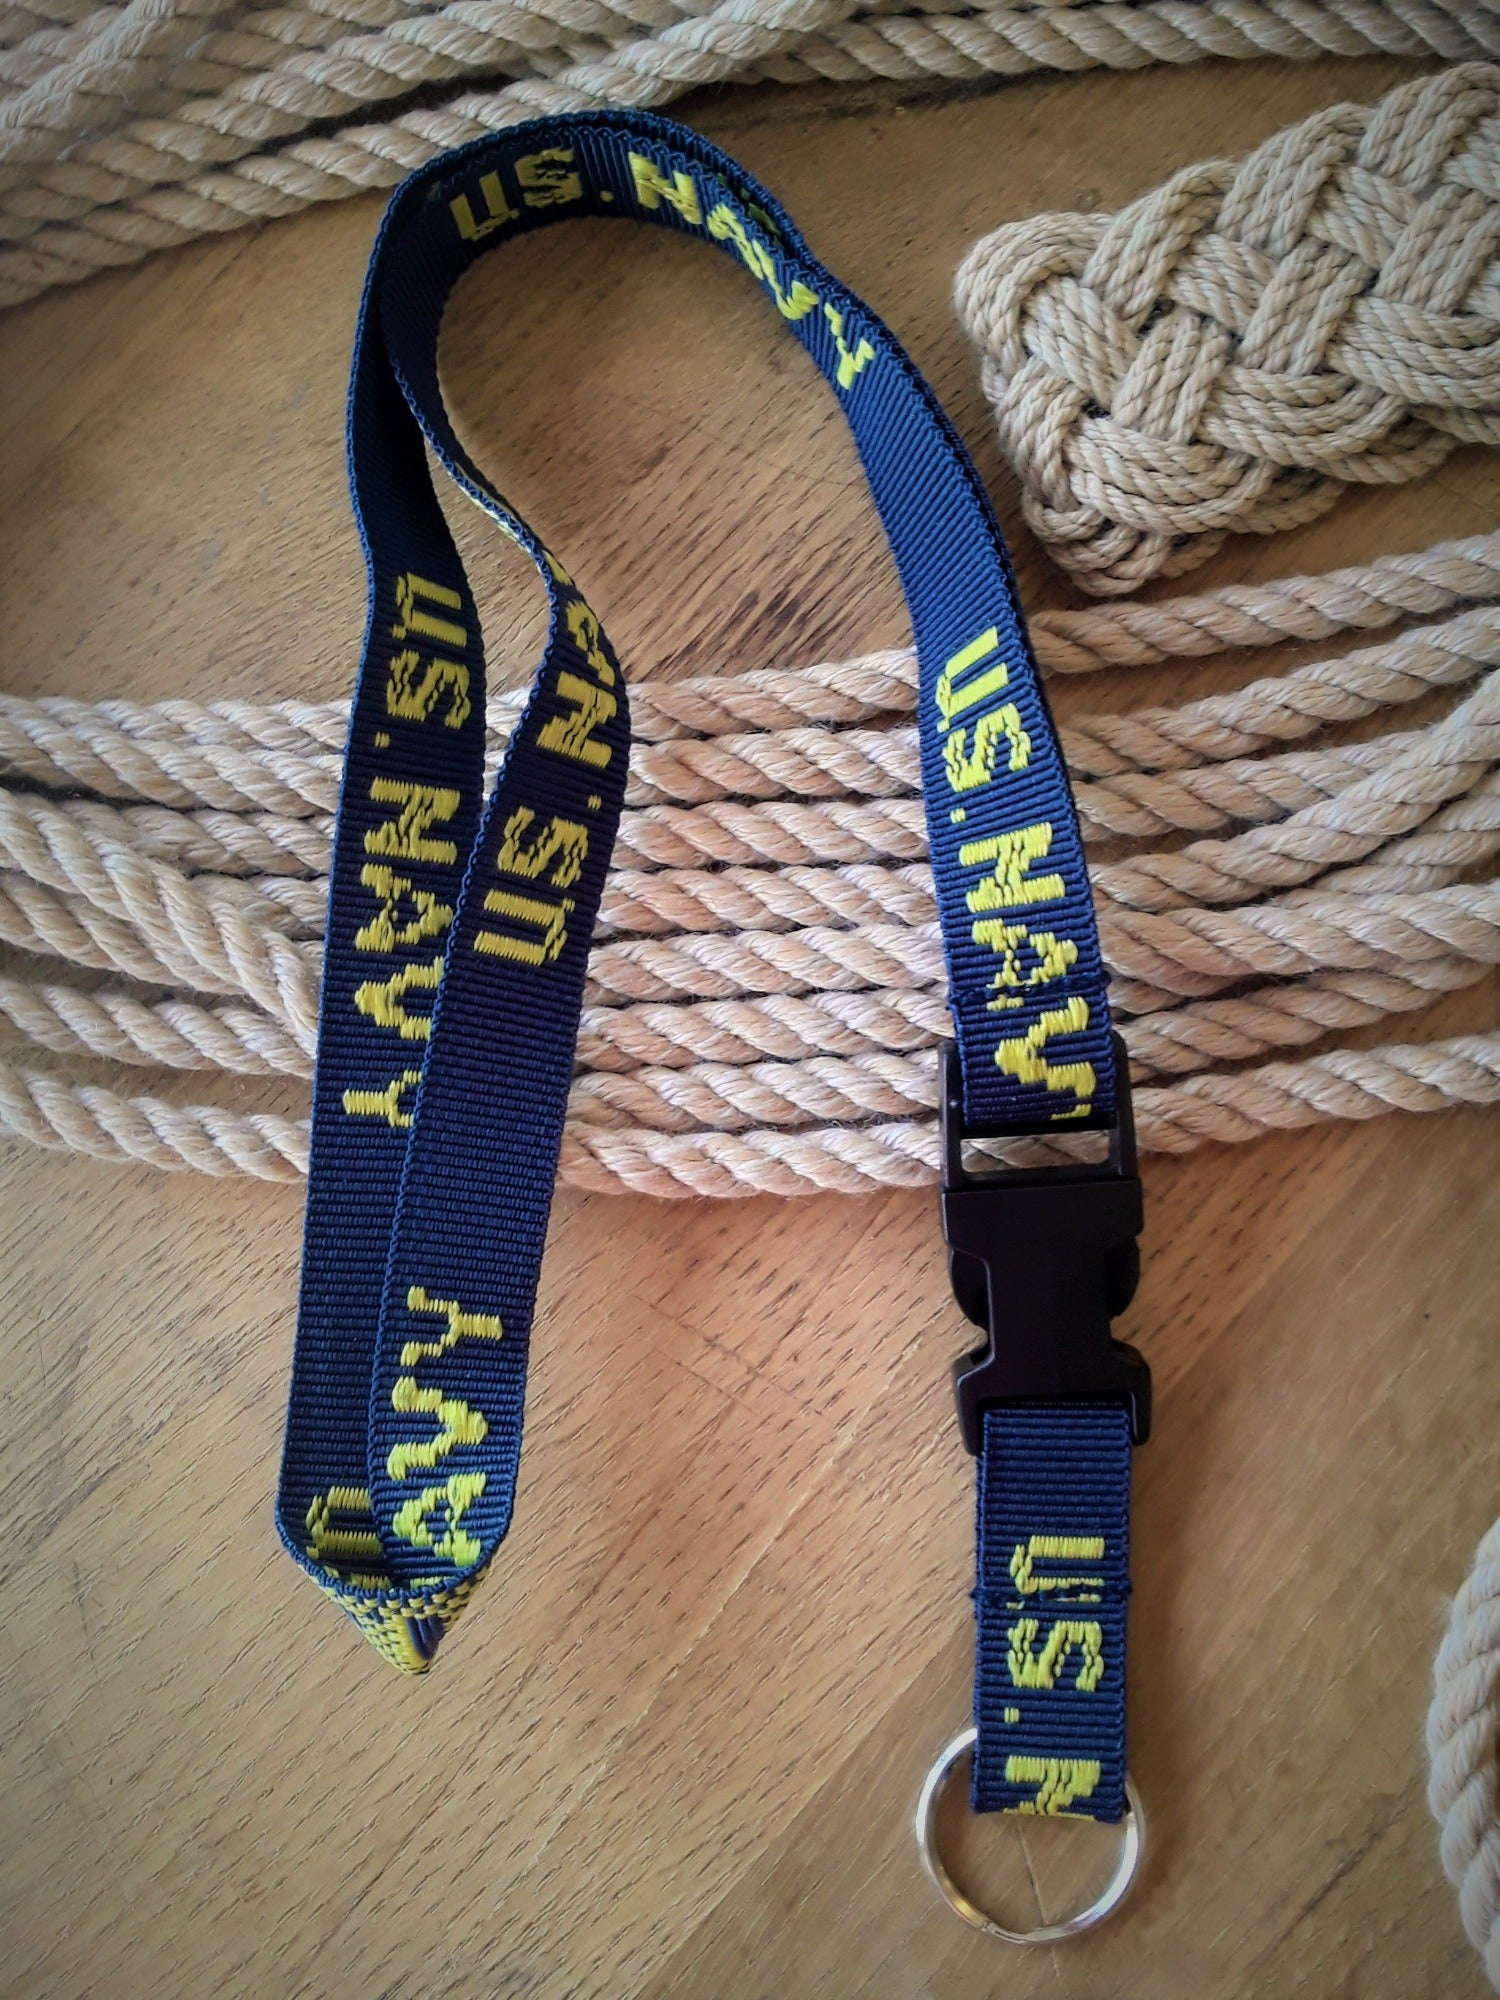 U.S. Navy DEMB in Gold Thread on Removable Clasp Blue Lanyard